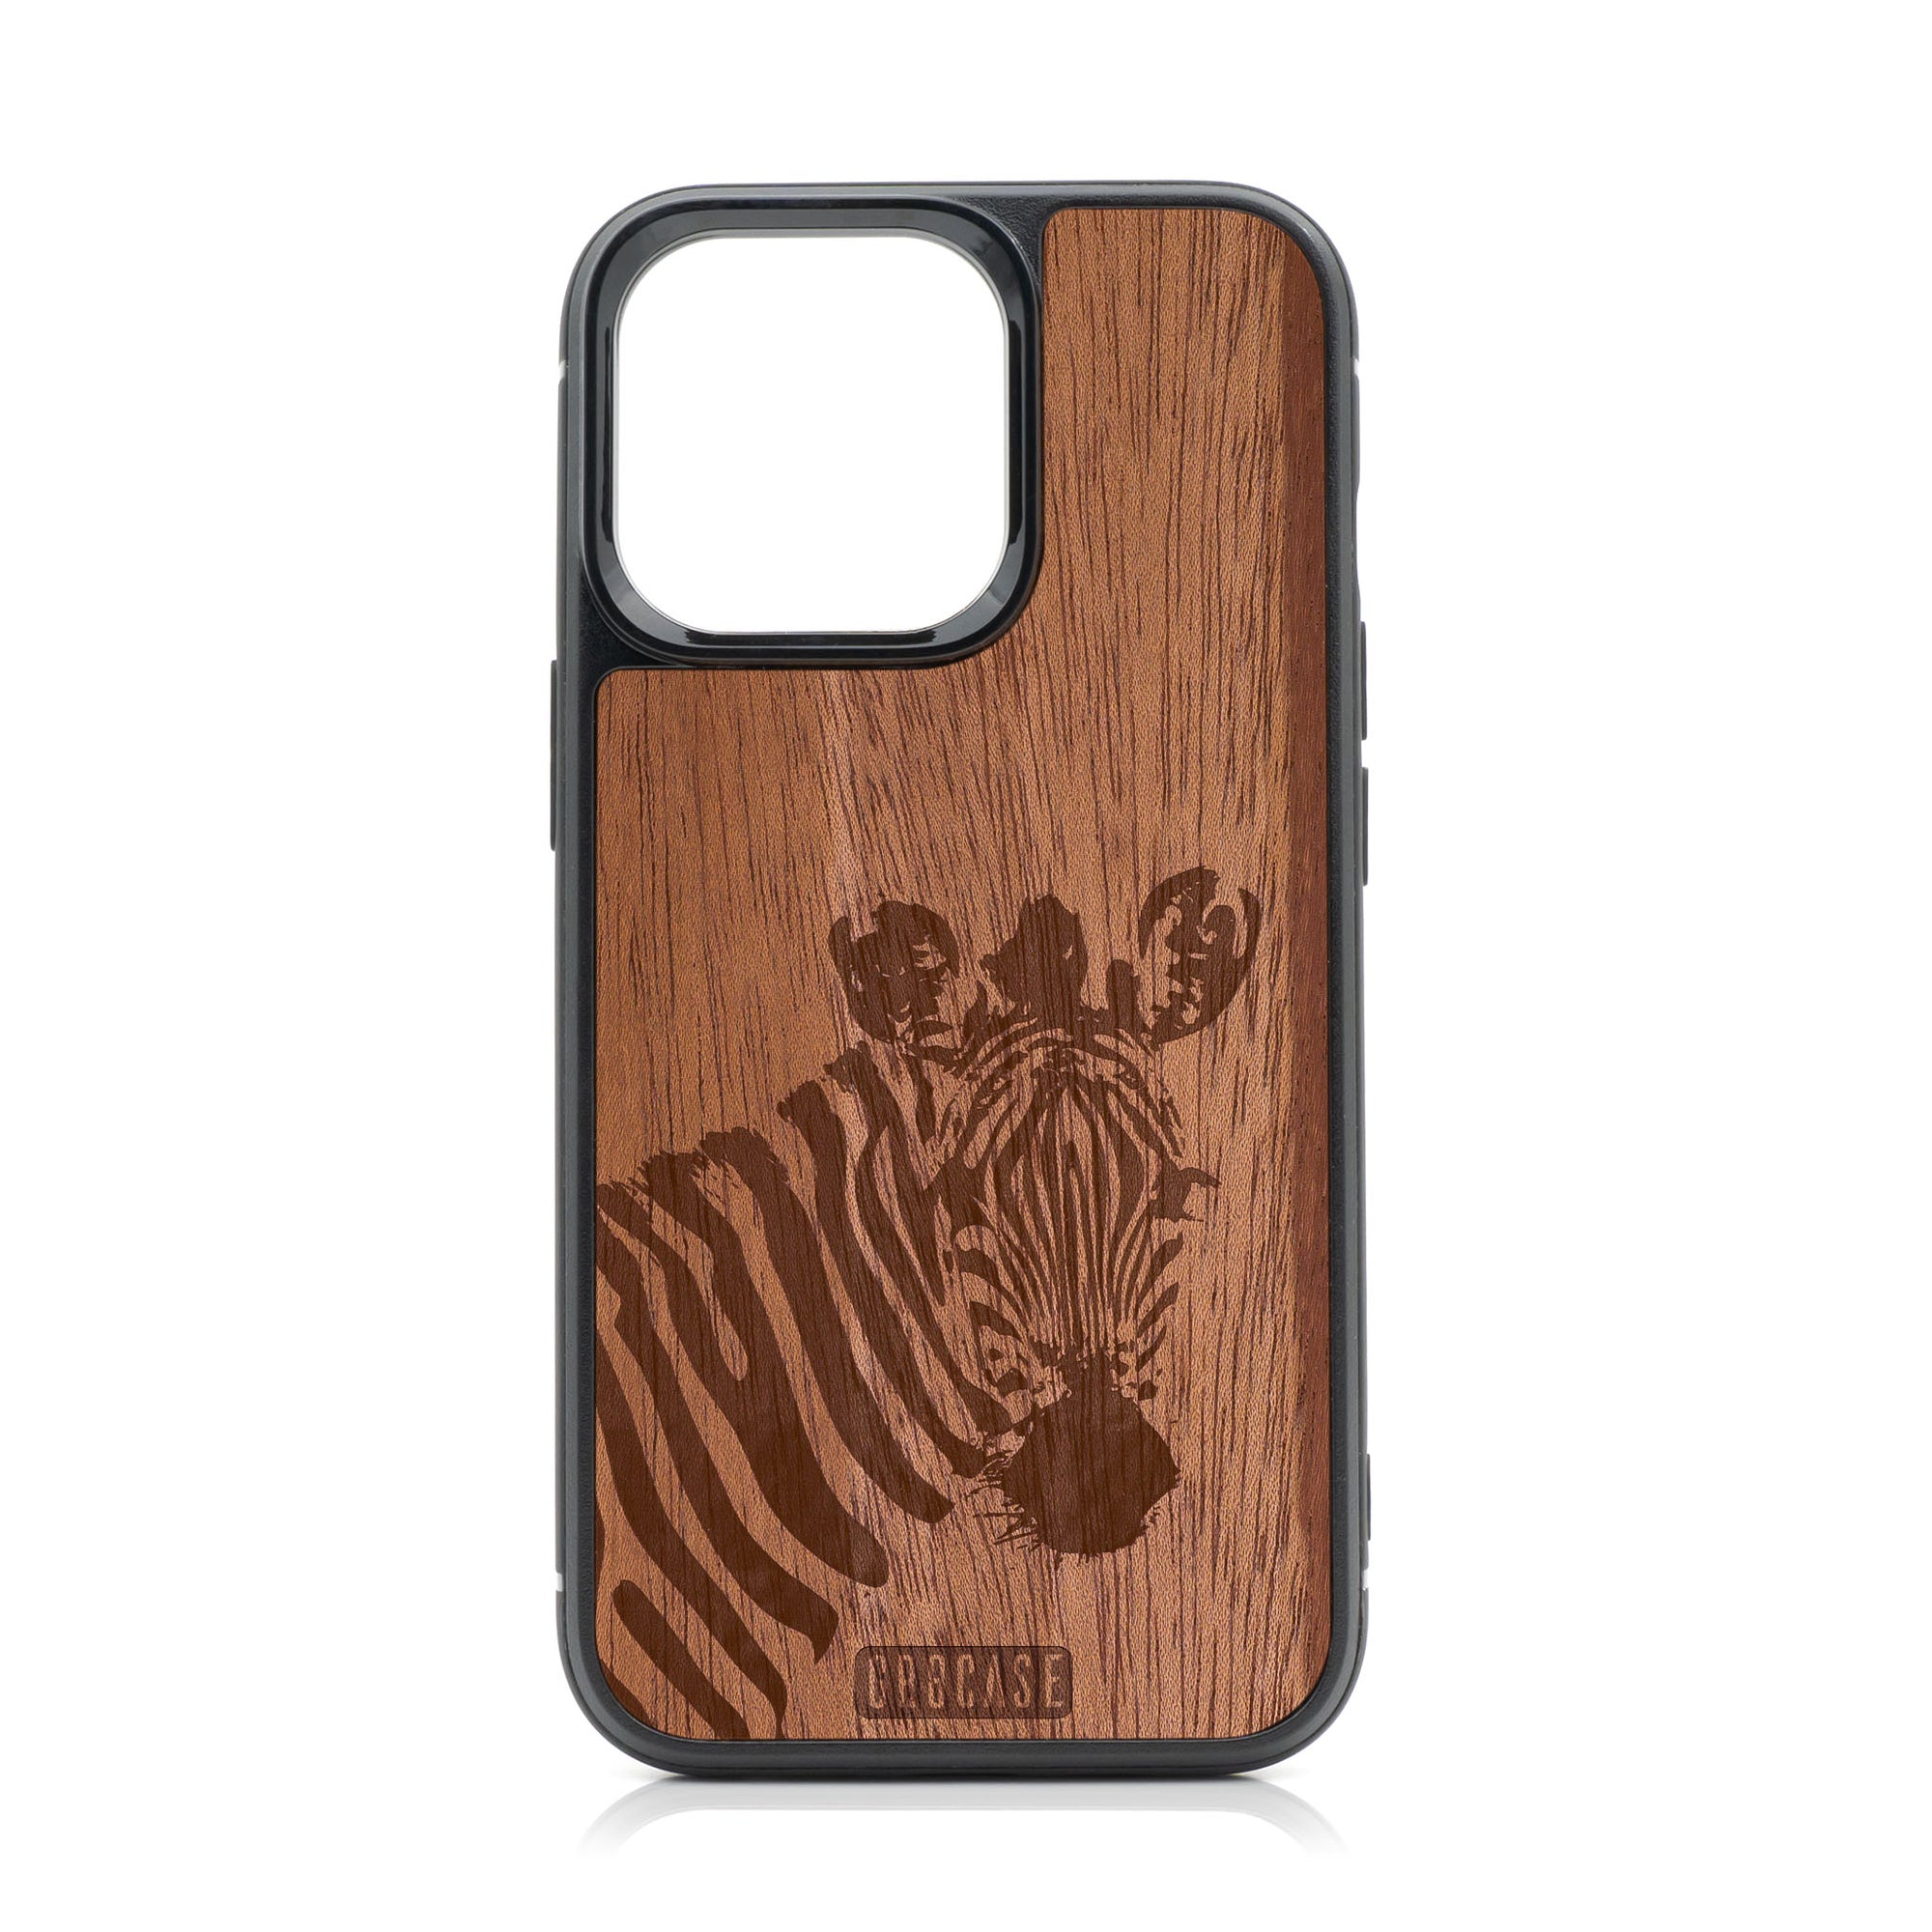 Lookout Zebra Design Wood Case For iPhone 13 Pro